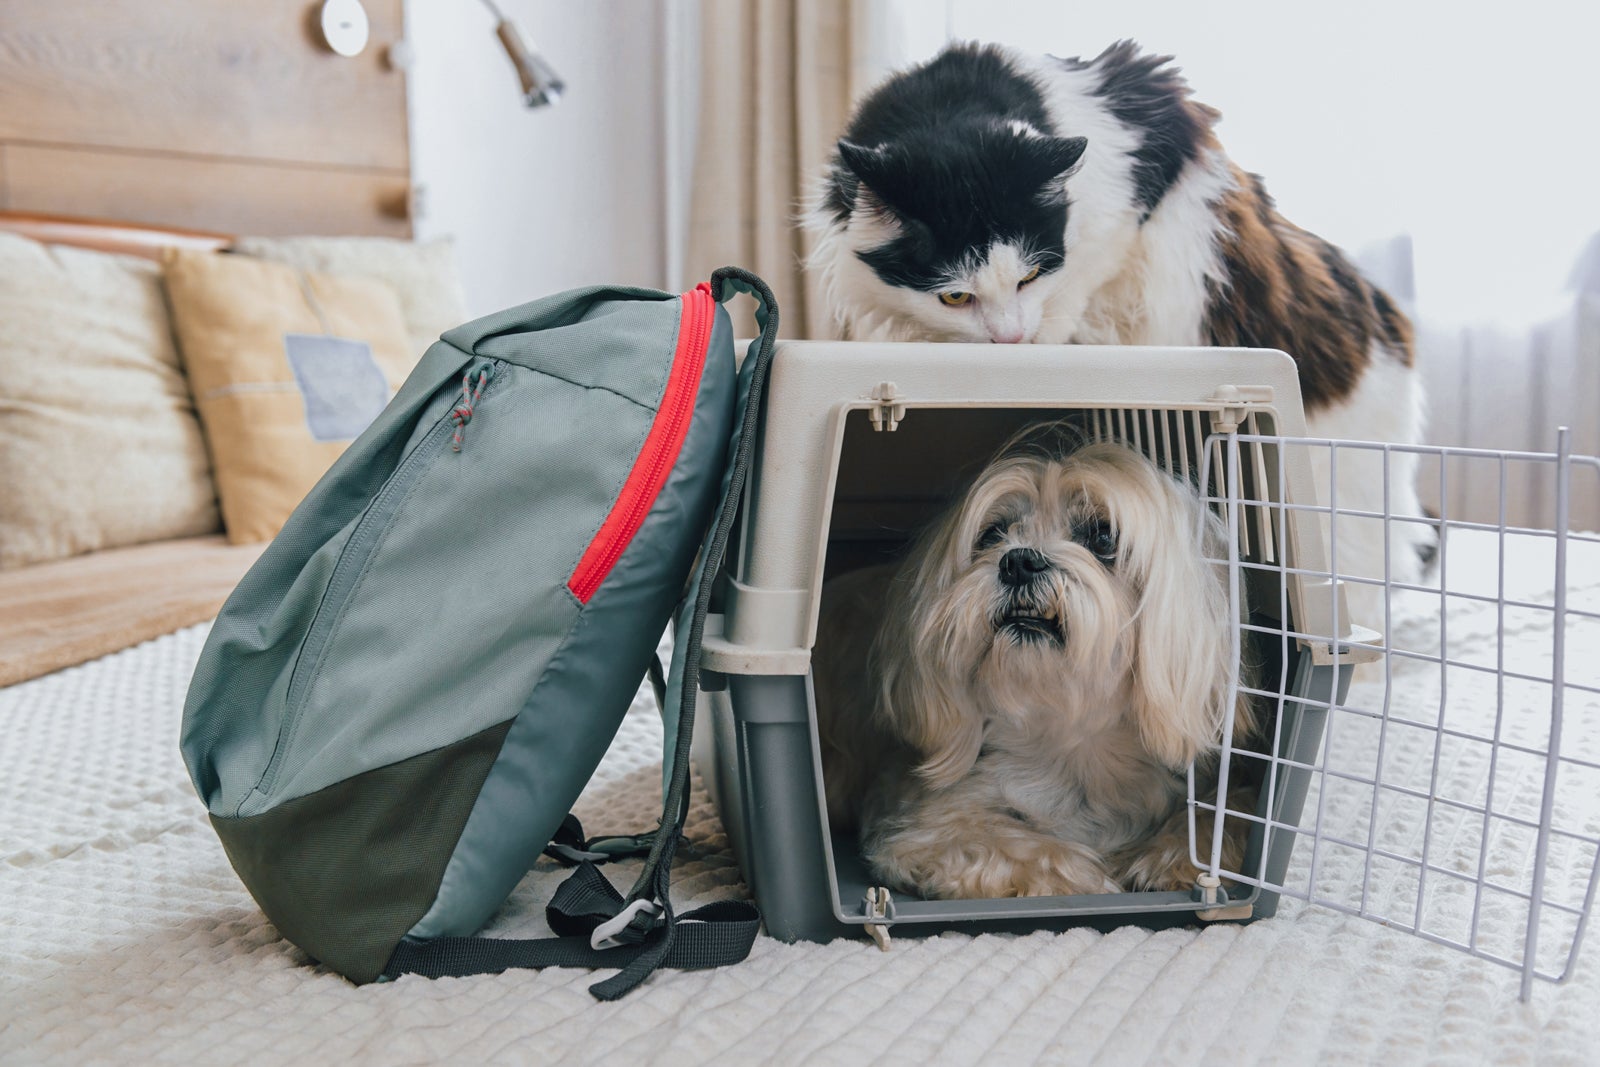 American Airlines' pet policy Here’s how to fly with your cat or dog